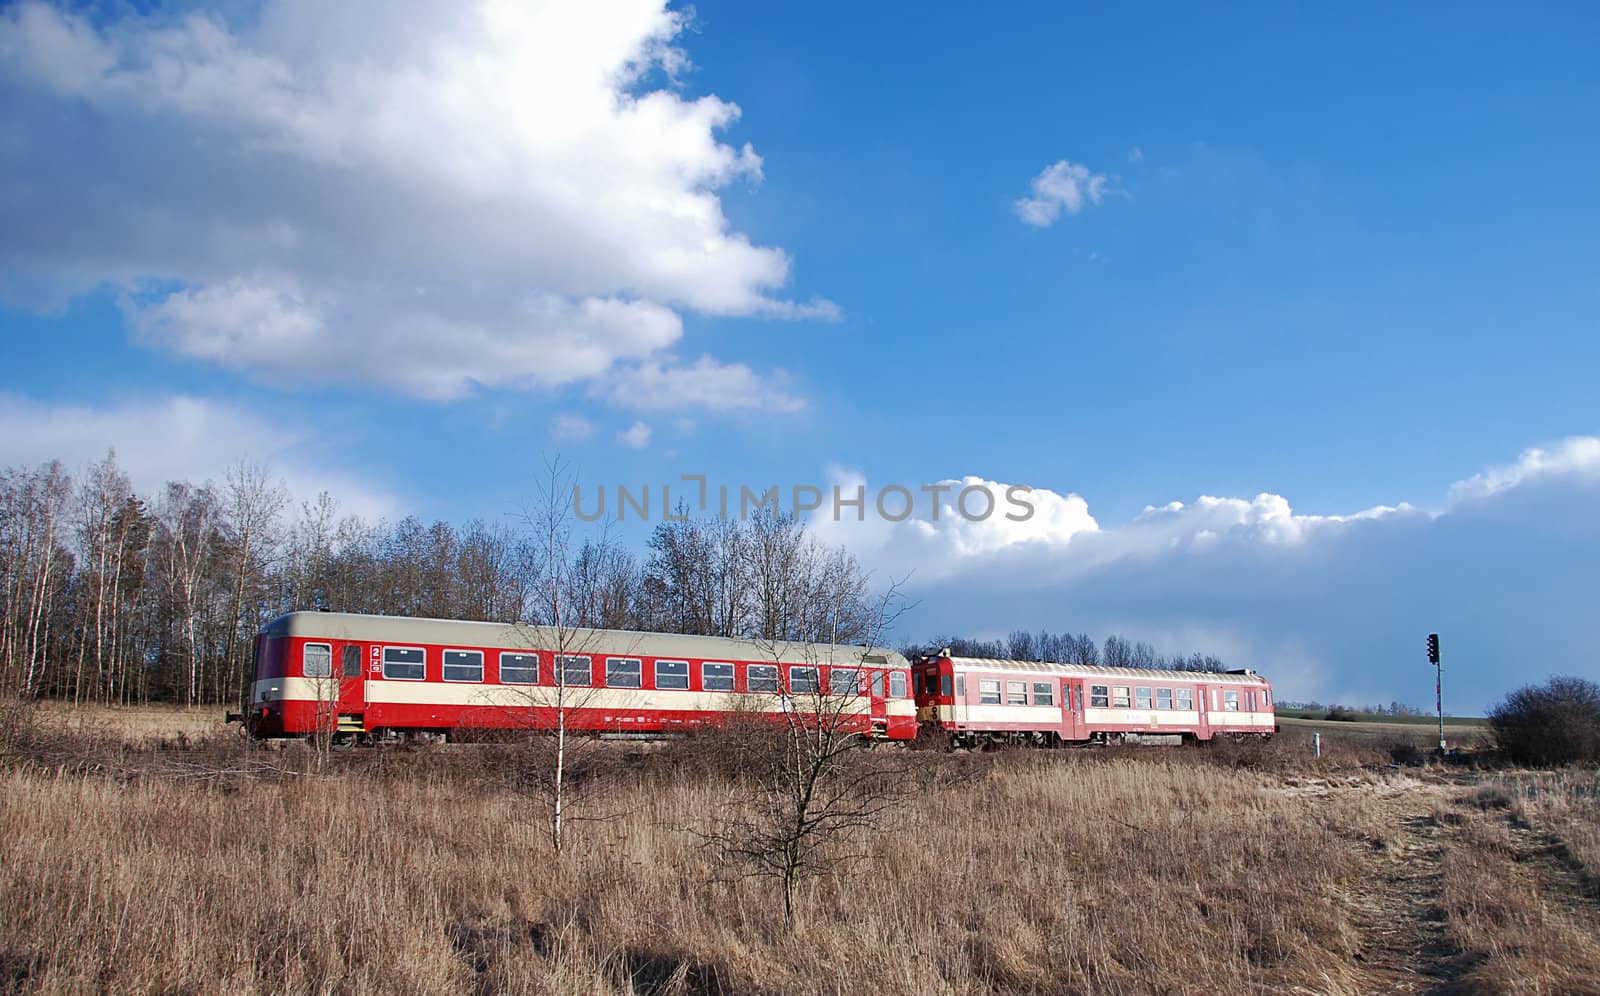 A small local train in the country scenery